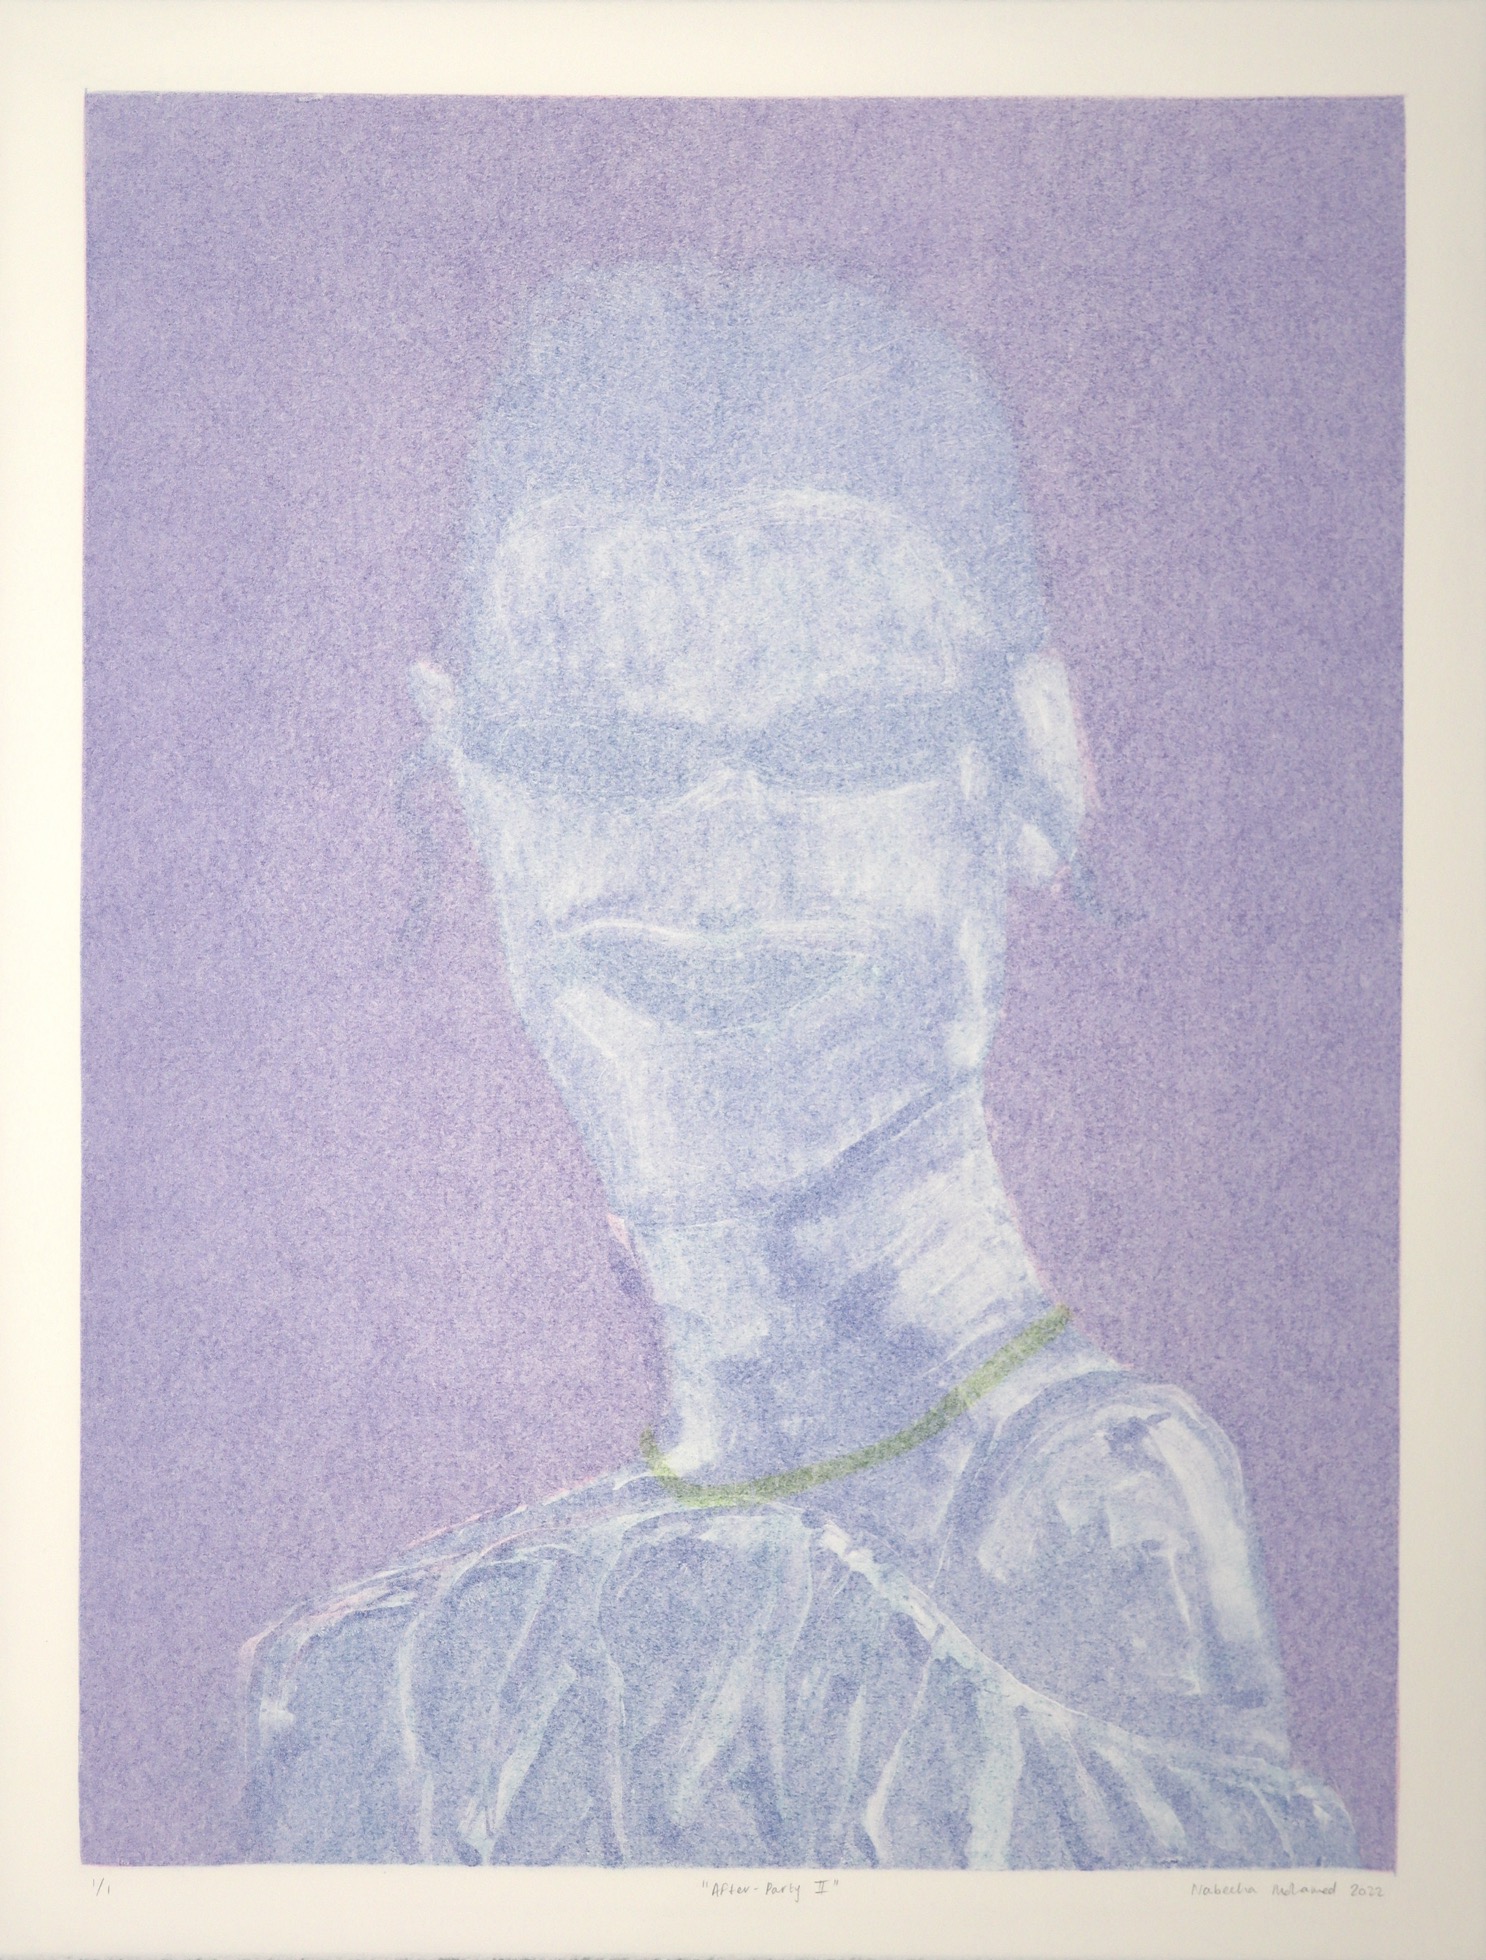 Monotype portrait of young woman in purples and blue by Nabeeha Mohamed